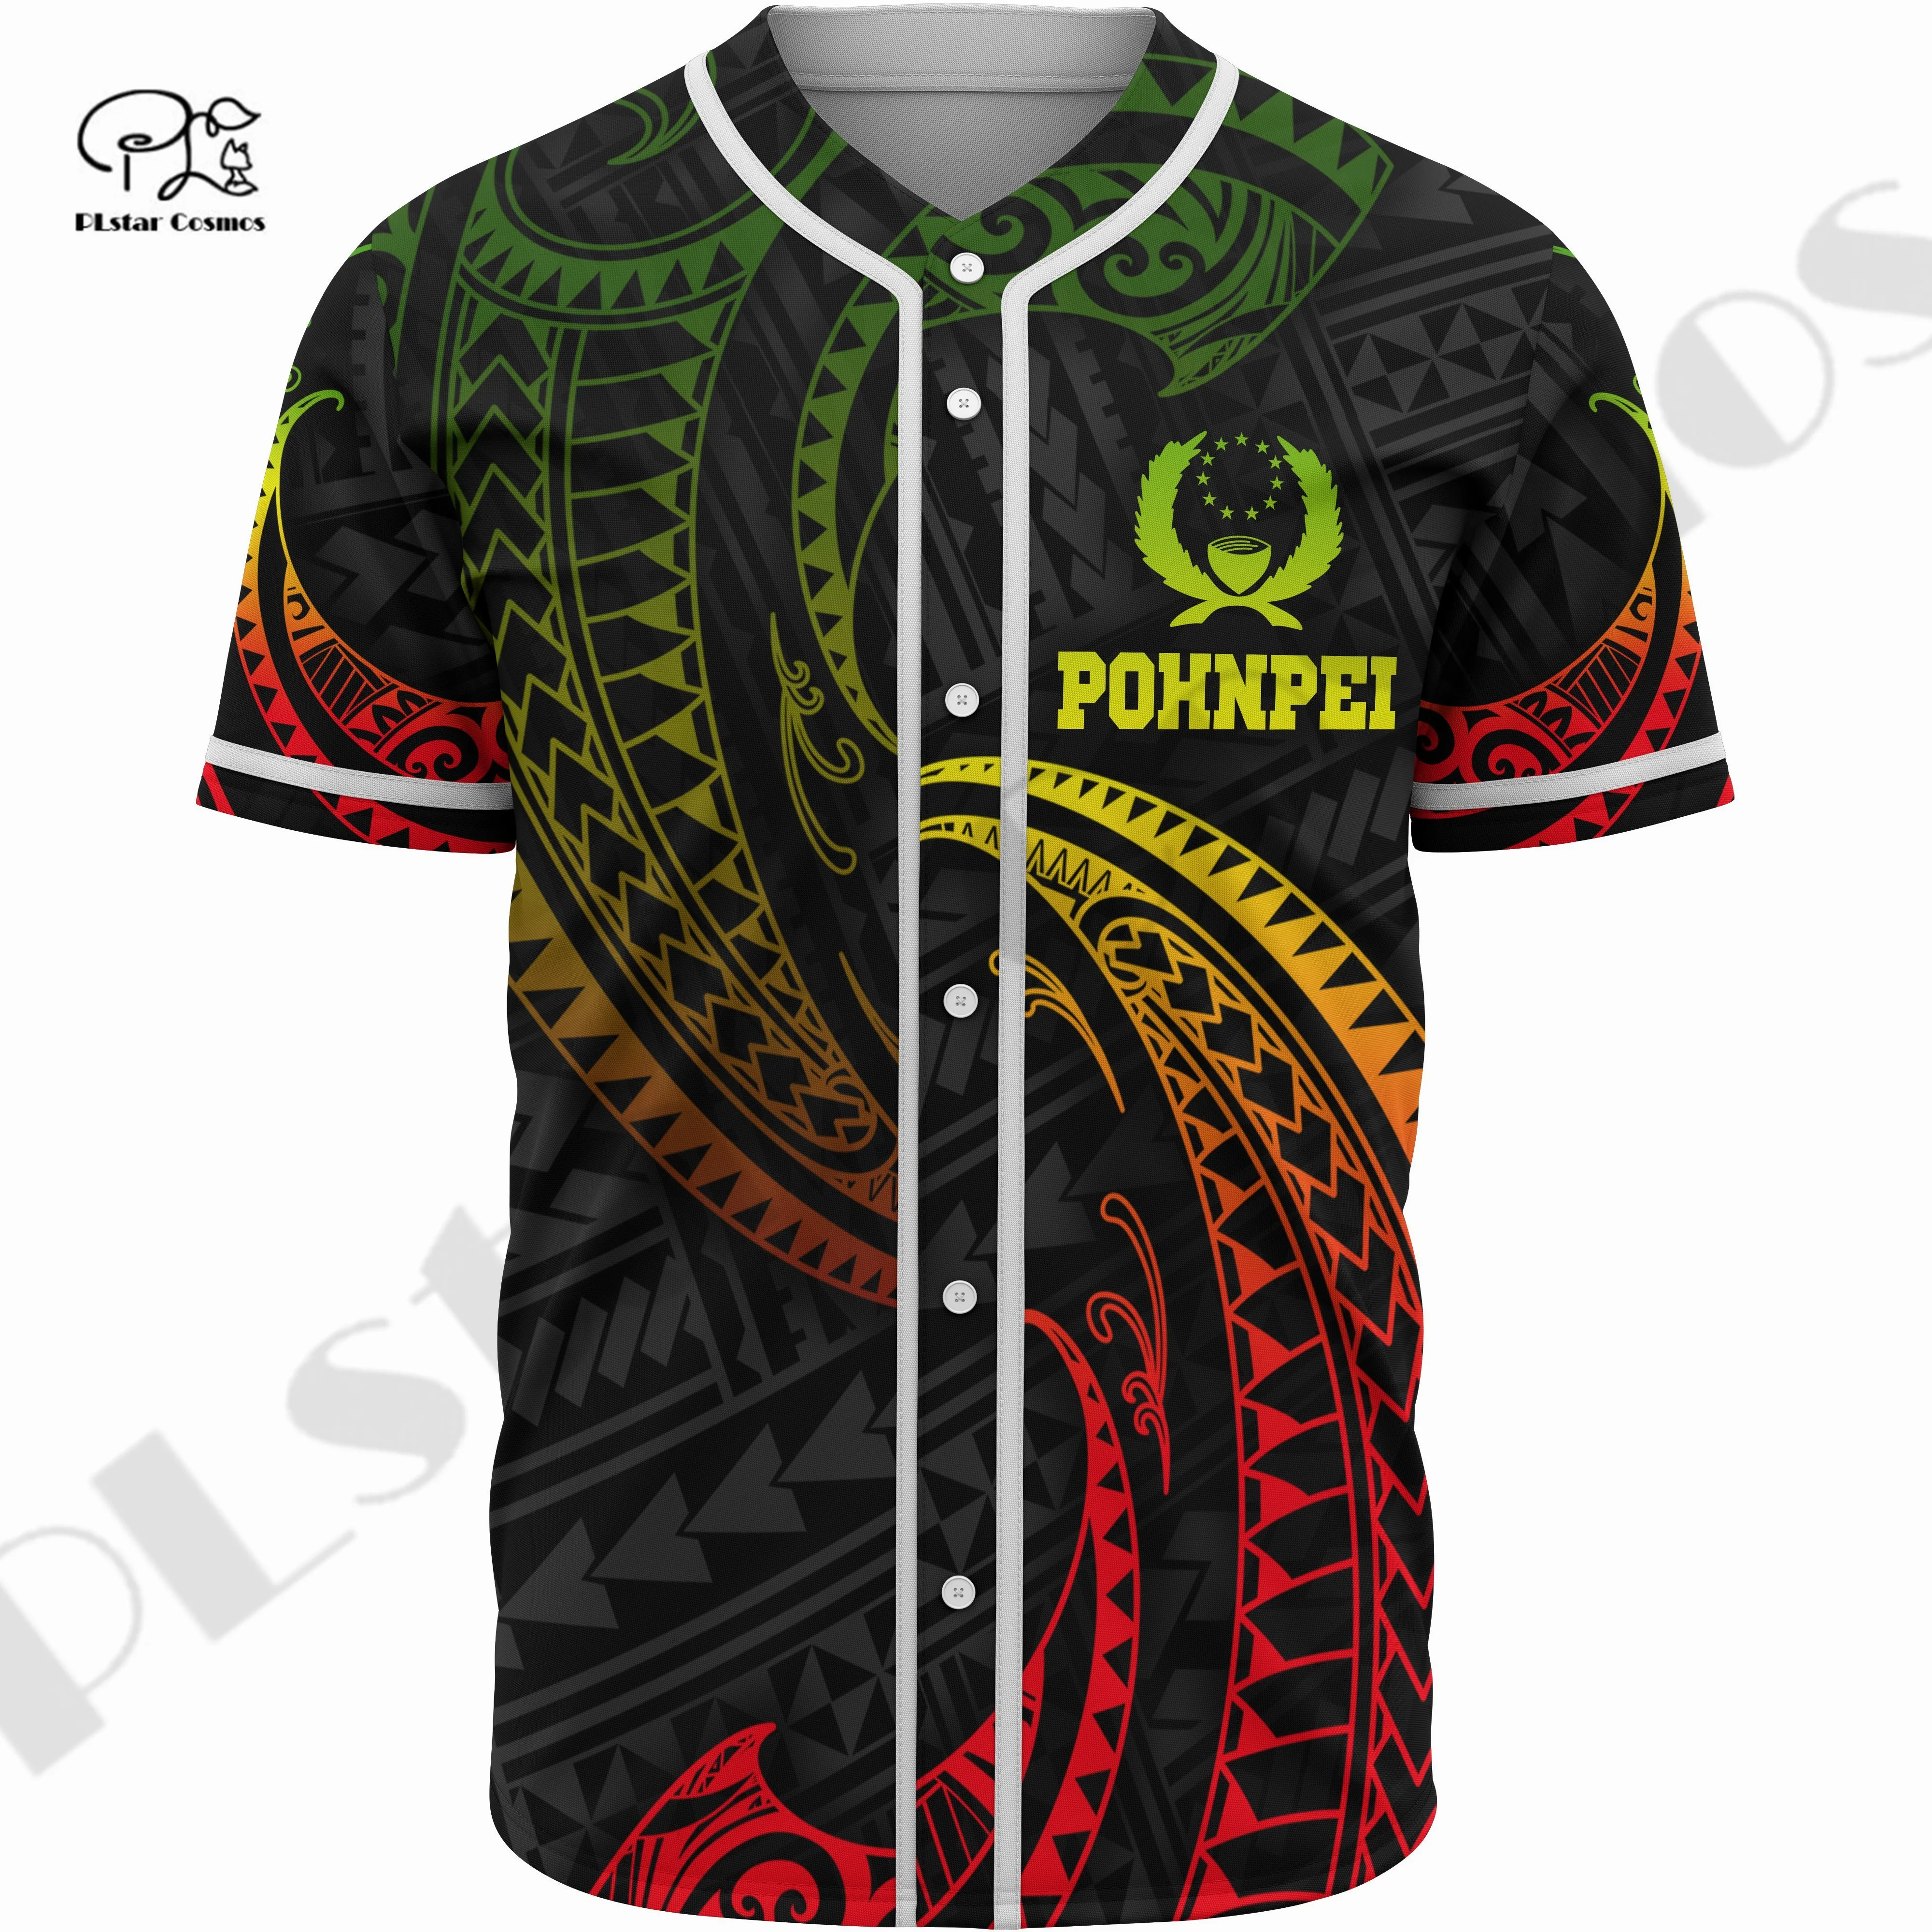 Newest 3Dprinted Baseball Jersey Shirt Pohnpei Polynesian Tribal Wave Tattoo Casual Unique Unisex Funny Sport Streewear Style-1 5